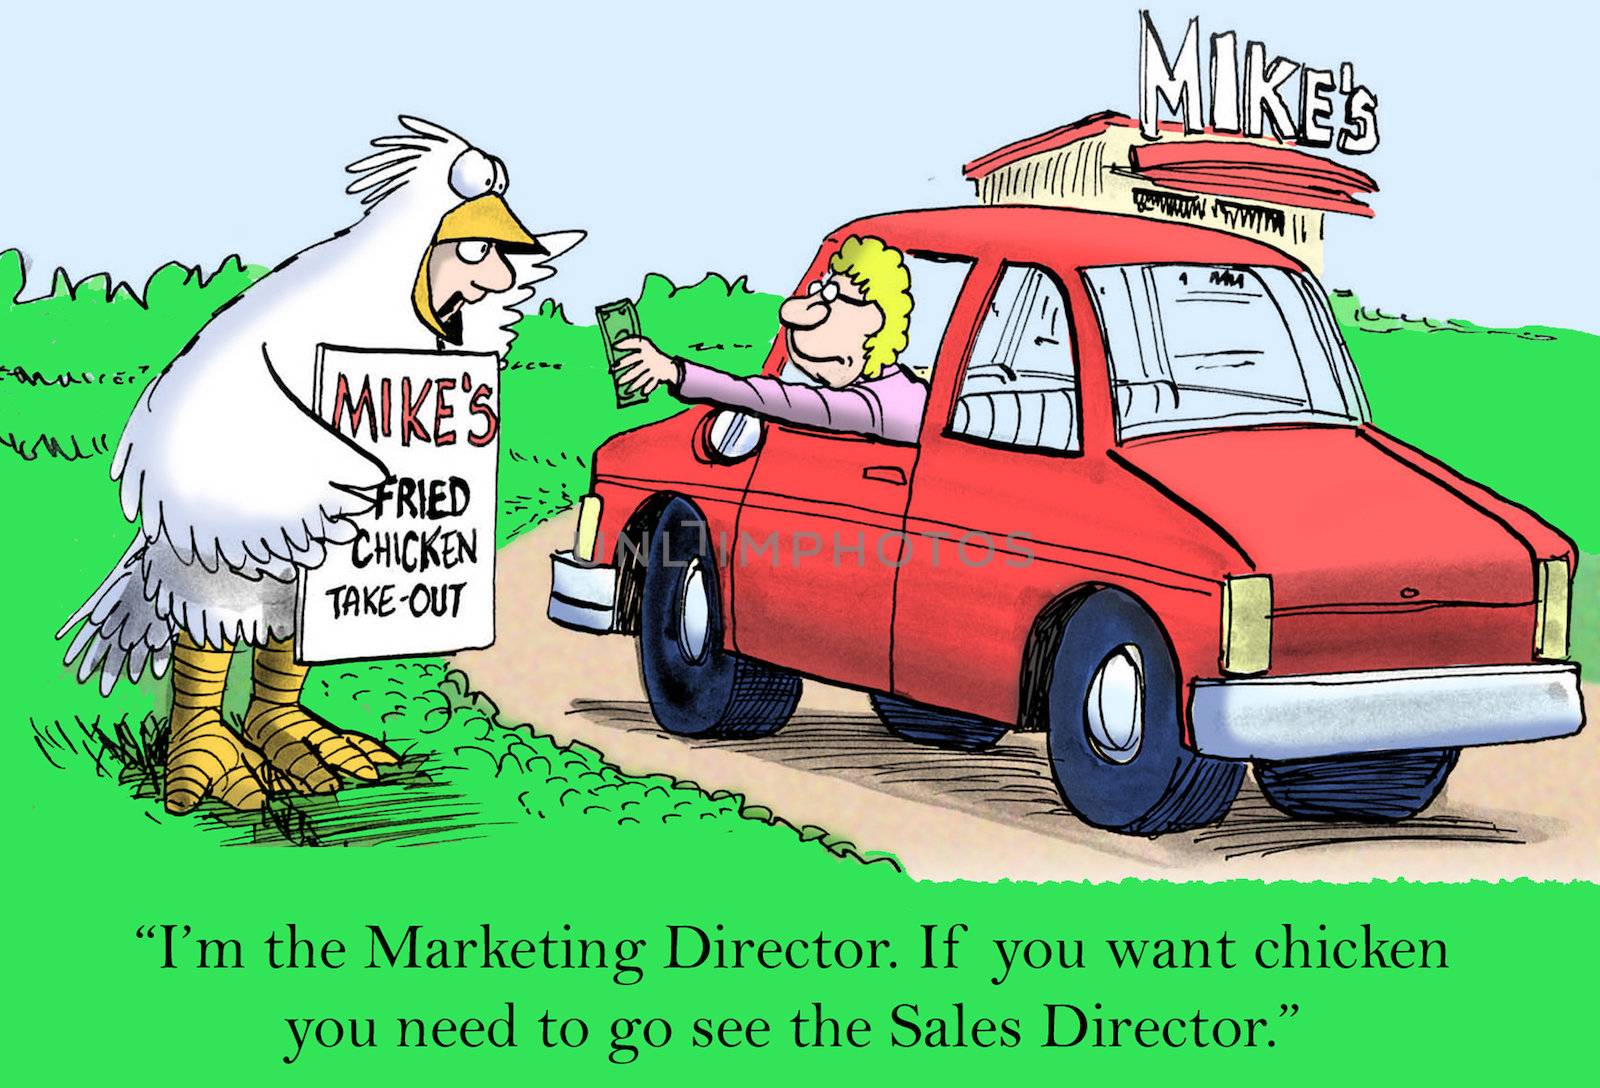 "I'm the Marketing Director. If you want chicken you need to go see the Sales Director."